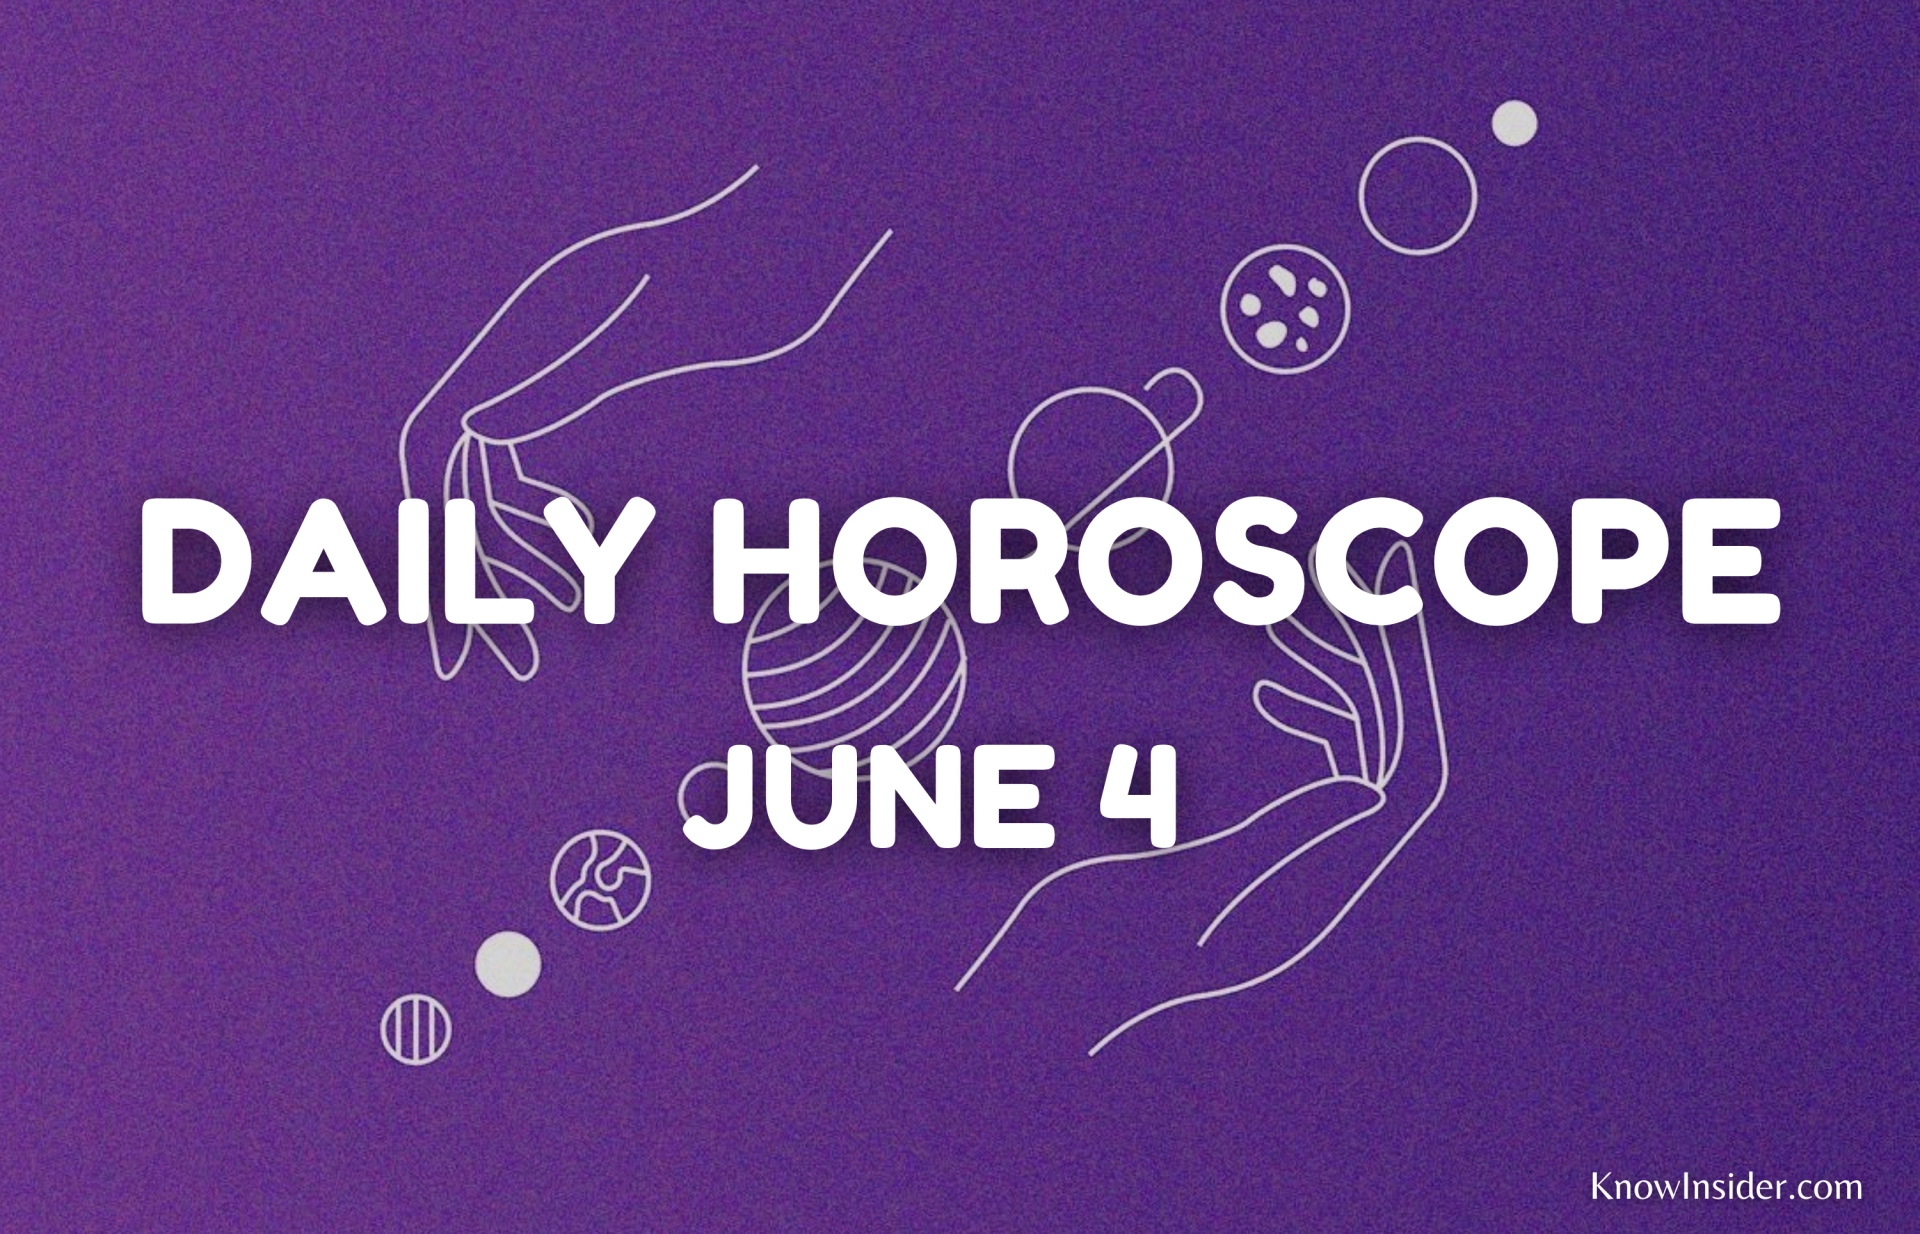 Daily Horoscope (Friday, June 4) Prediction For All Zodiac Signs with